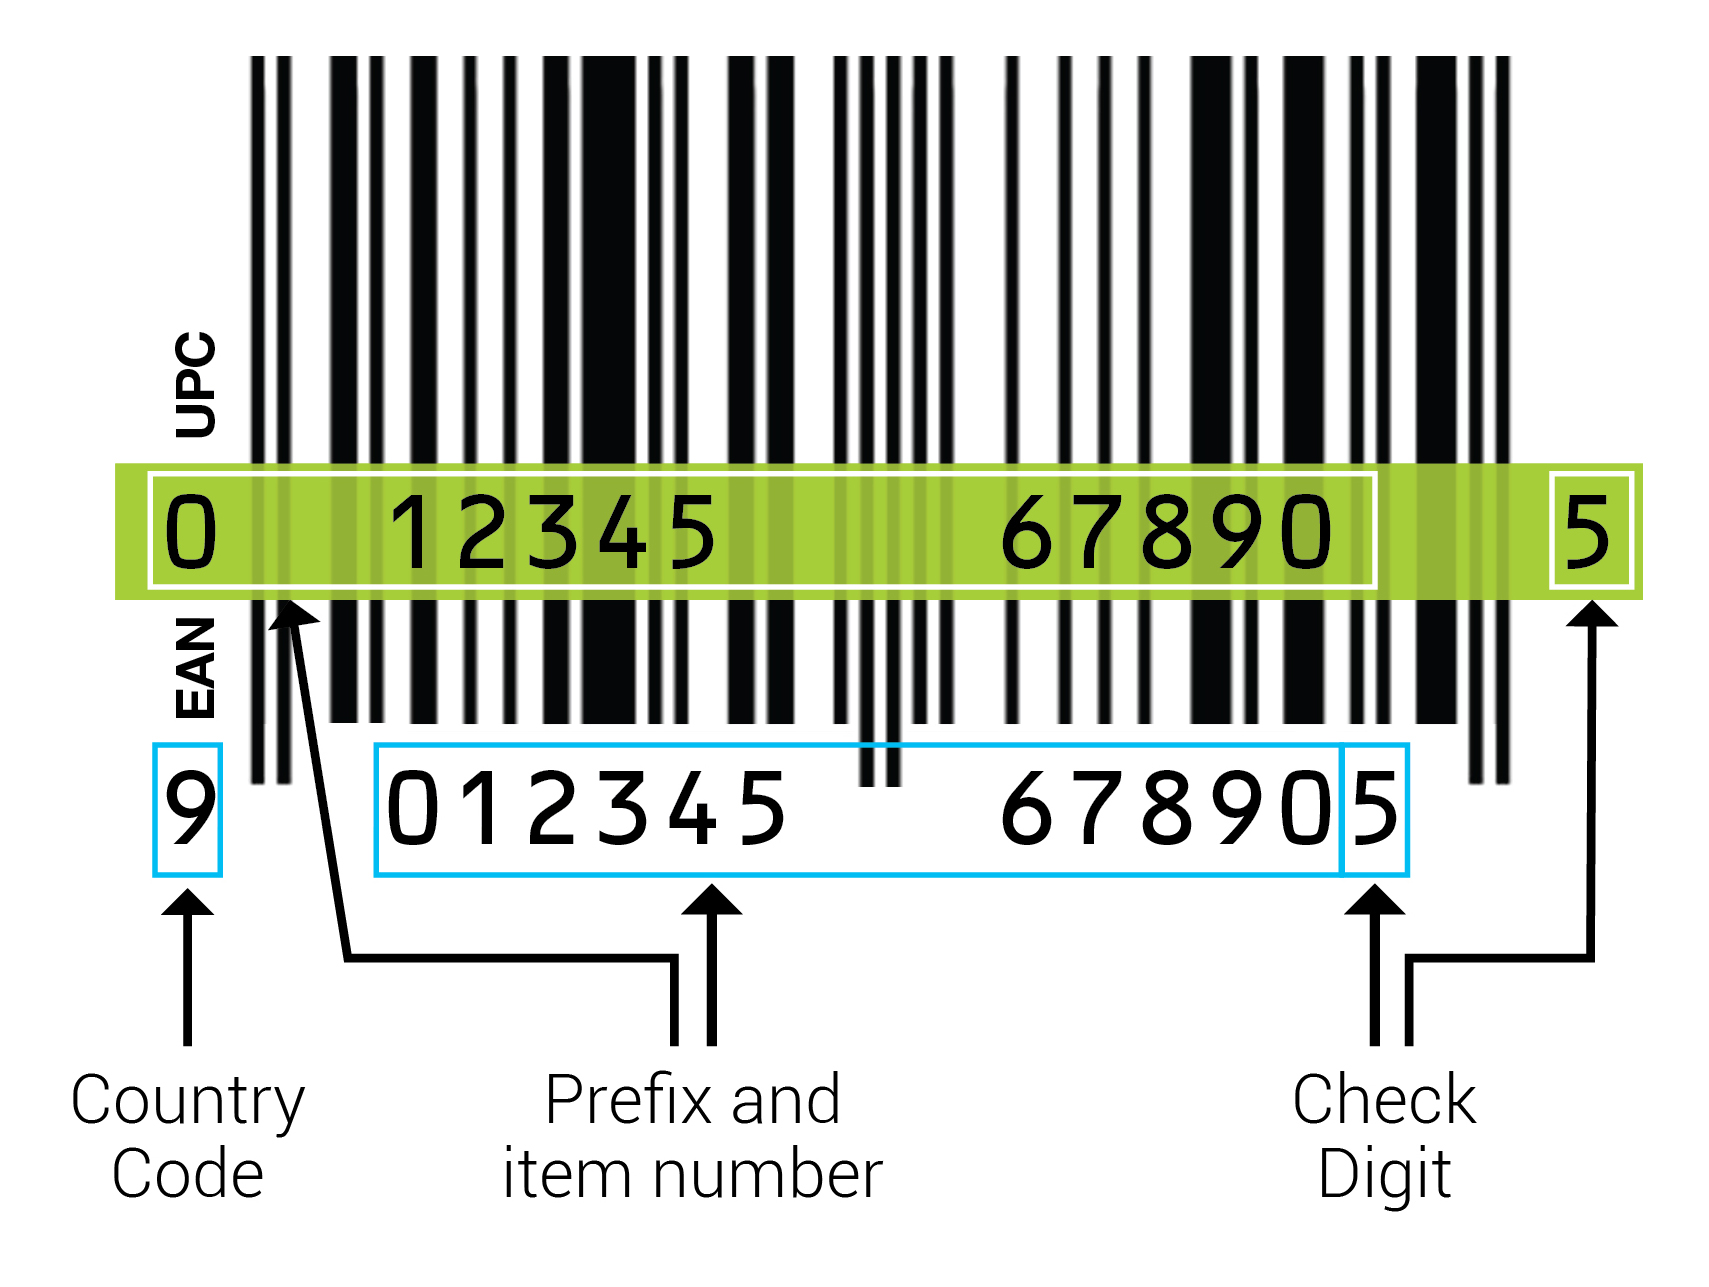 1D and 2D Barcodes Using Ean-13